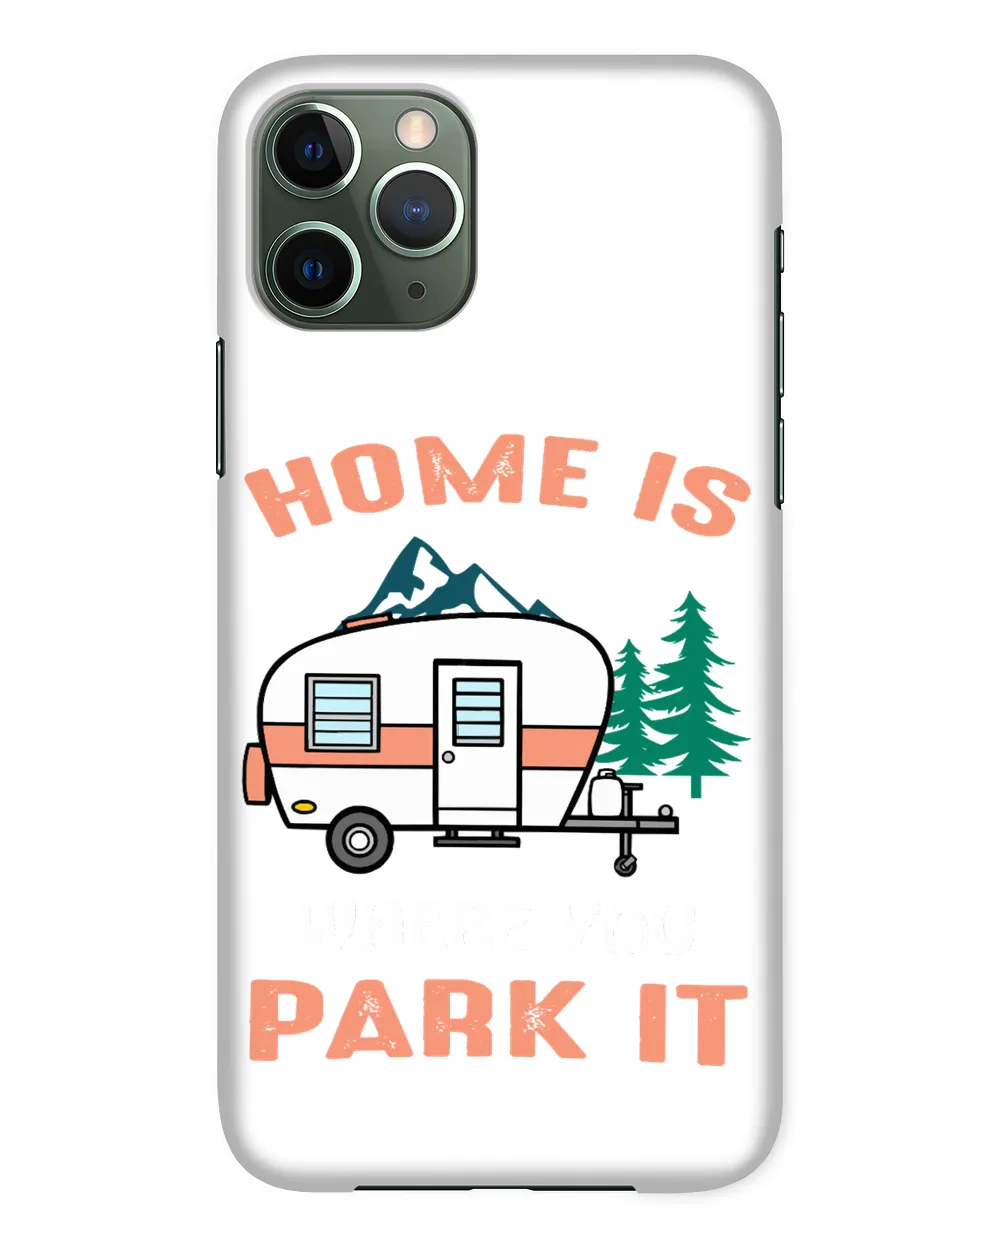 Camping Funny home is where you park it design campers campsite outdoor National Parks camper